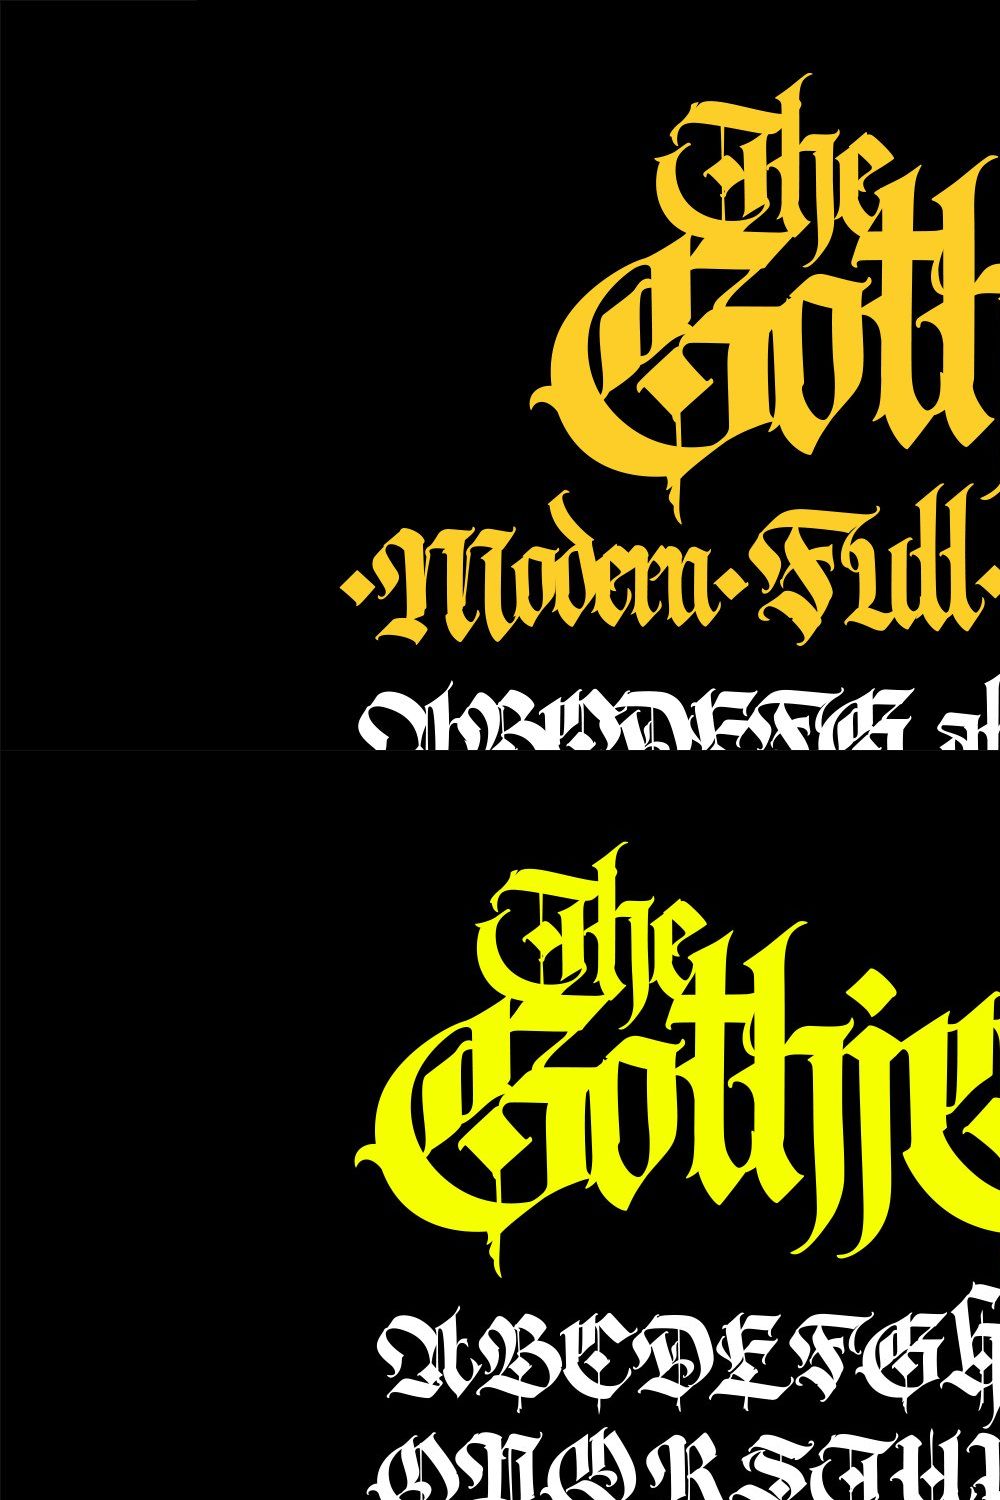 Gothic letters - 10 pinterest preview image.